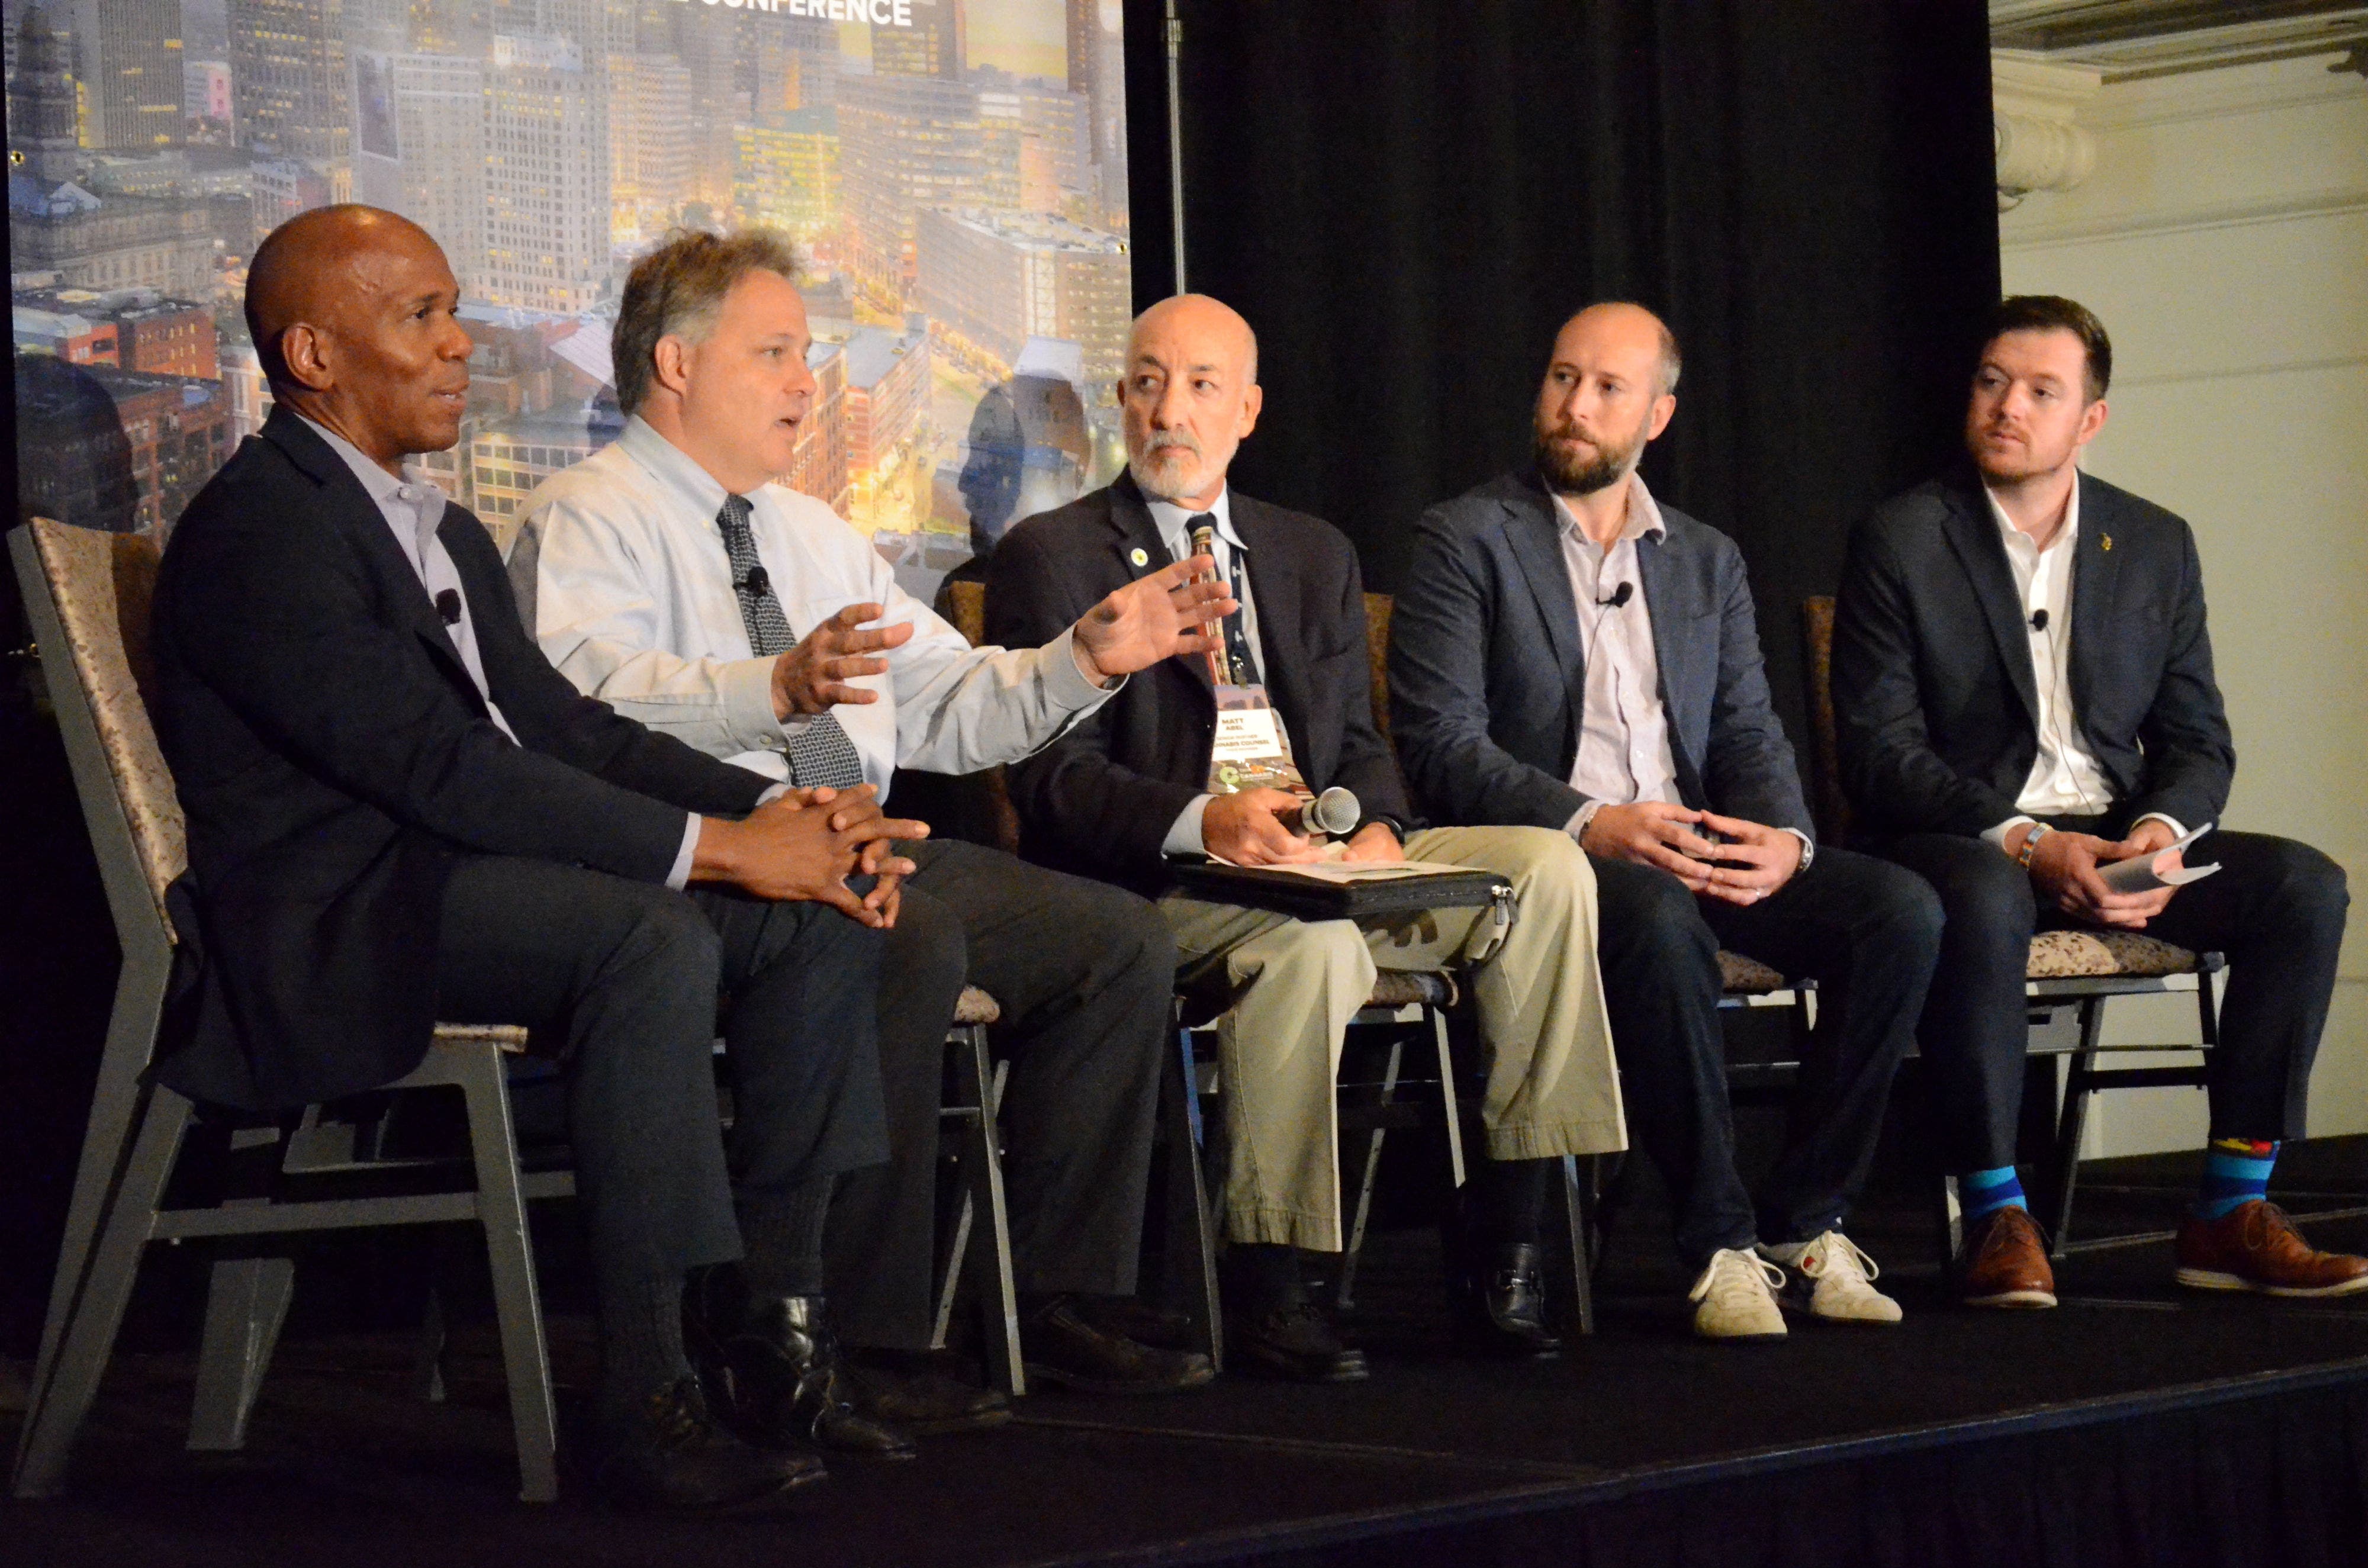 Michigan Policymakers Discuss The Future At Cannabis Capital Conference